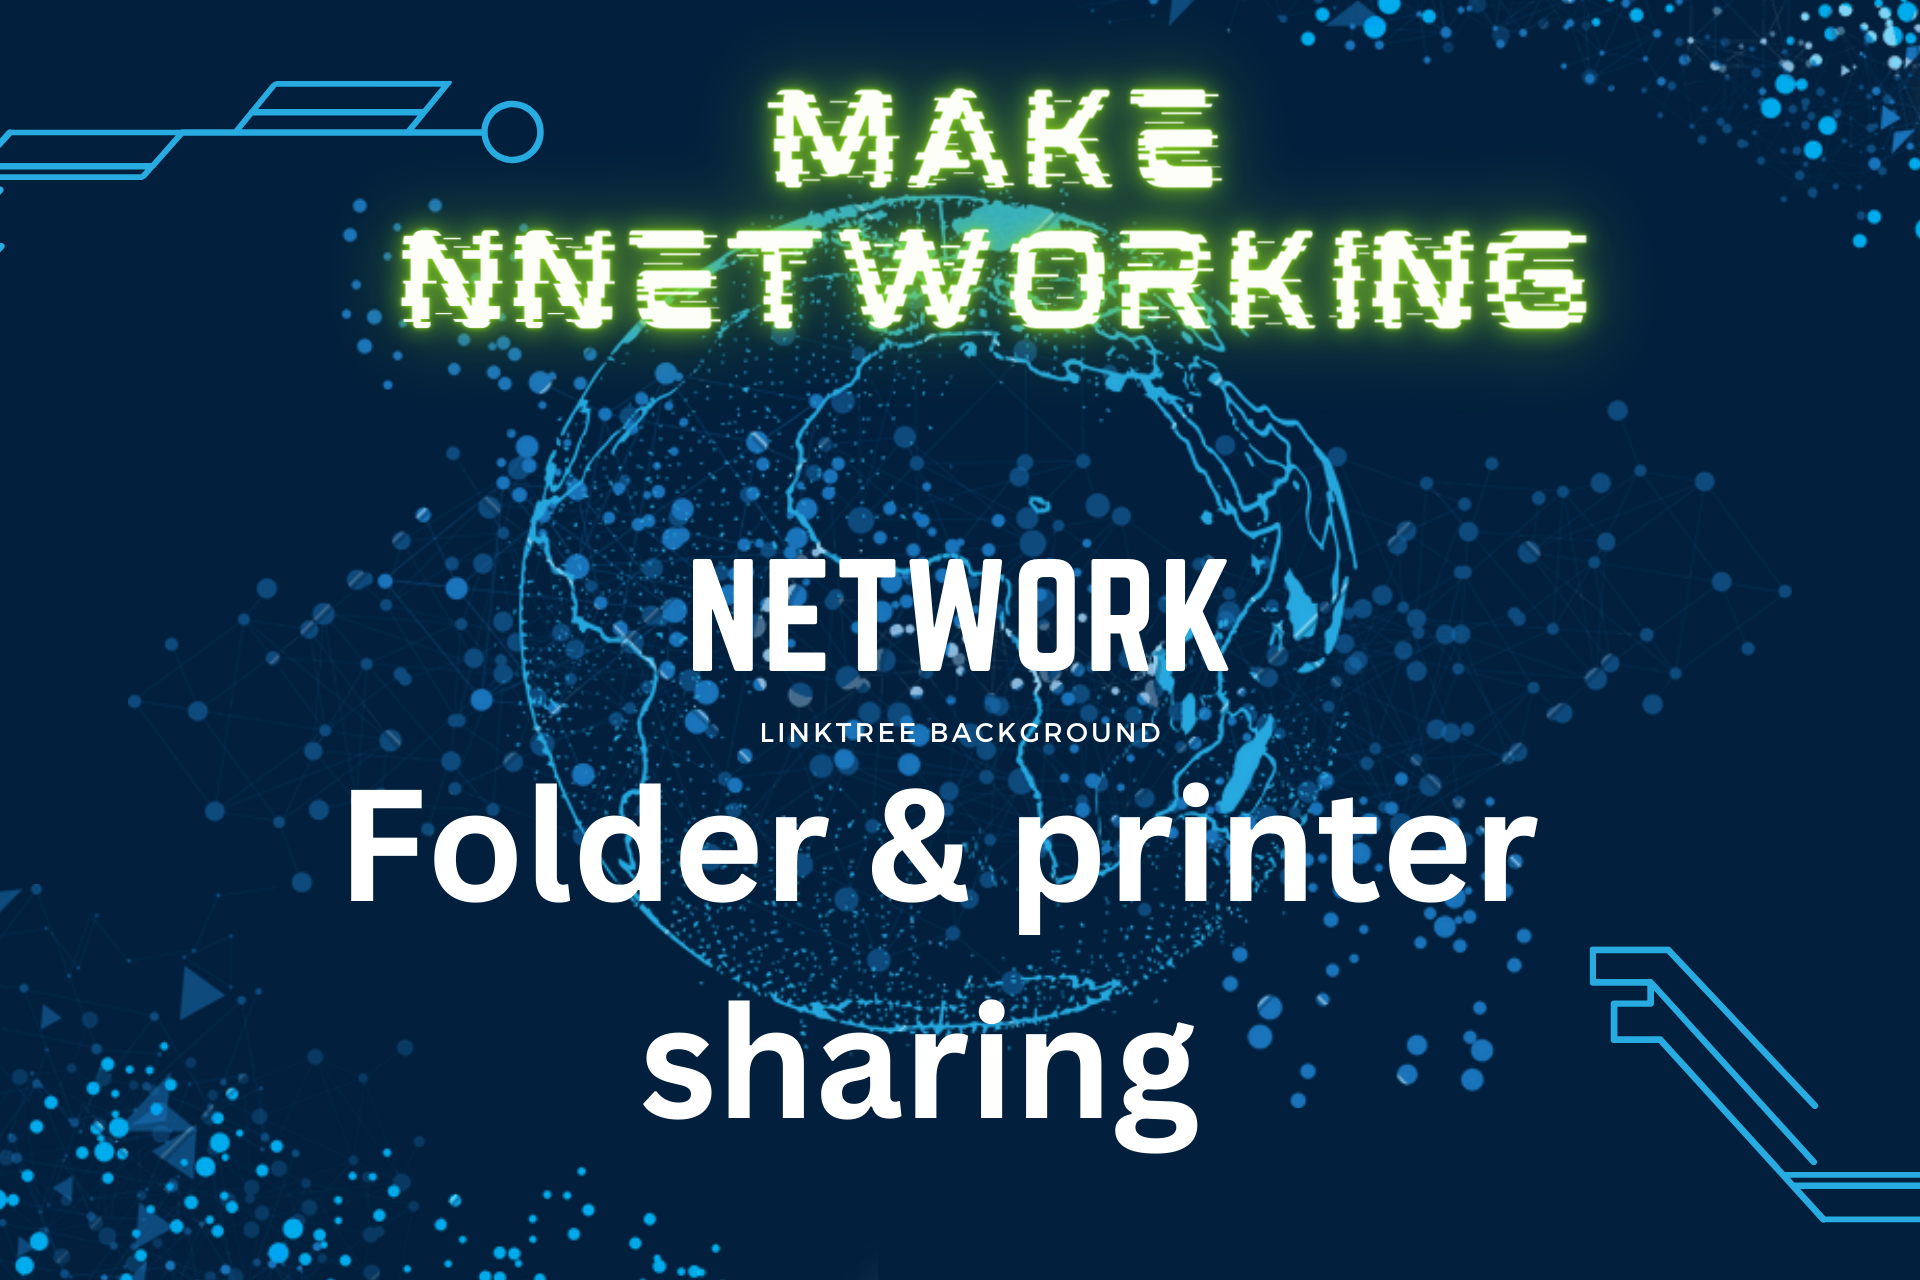 Windows Networking Made Easy: A Step-by-Step Guide to Printer and File Sharing